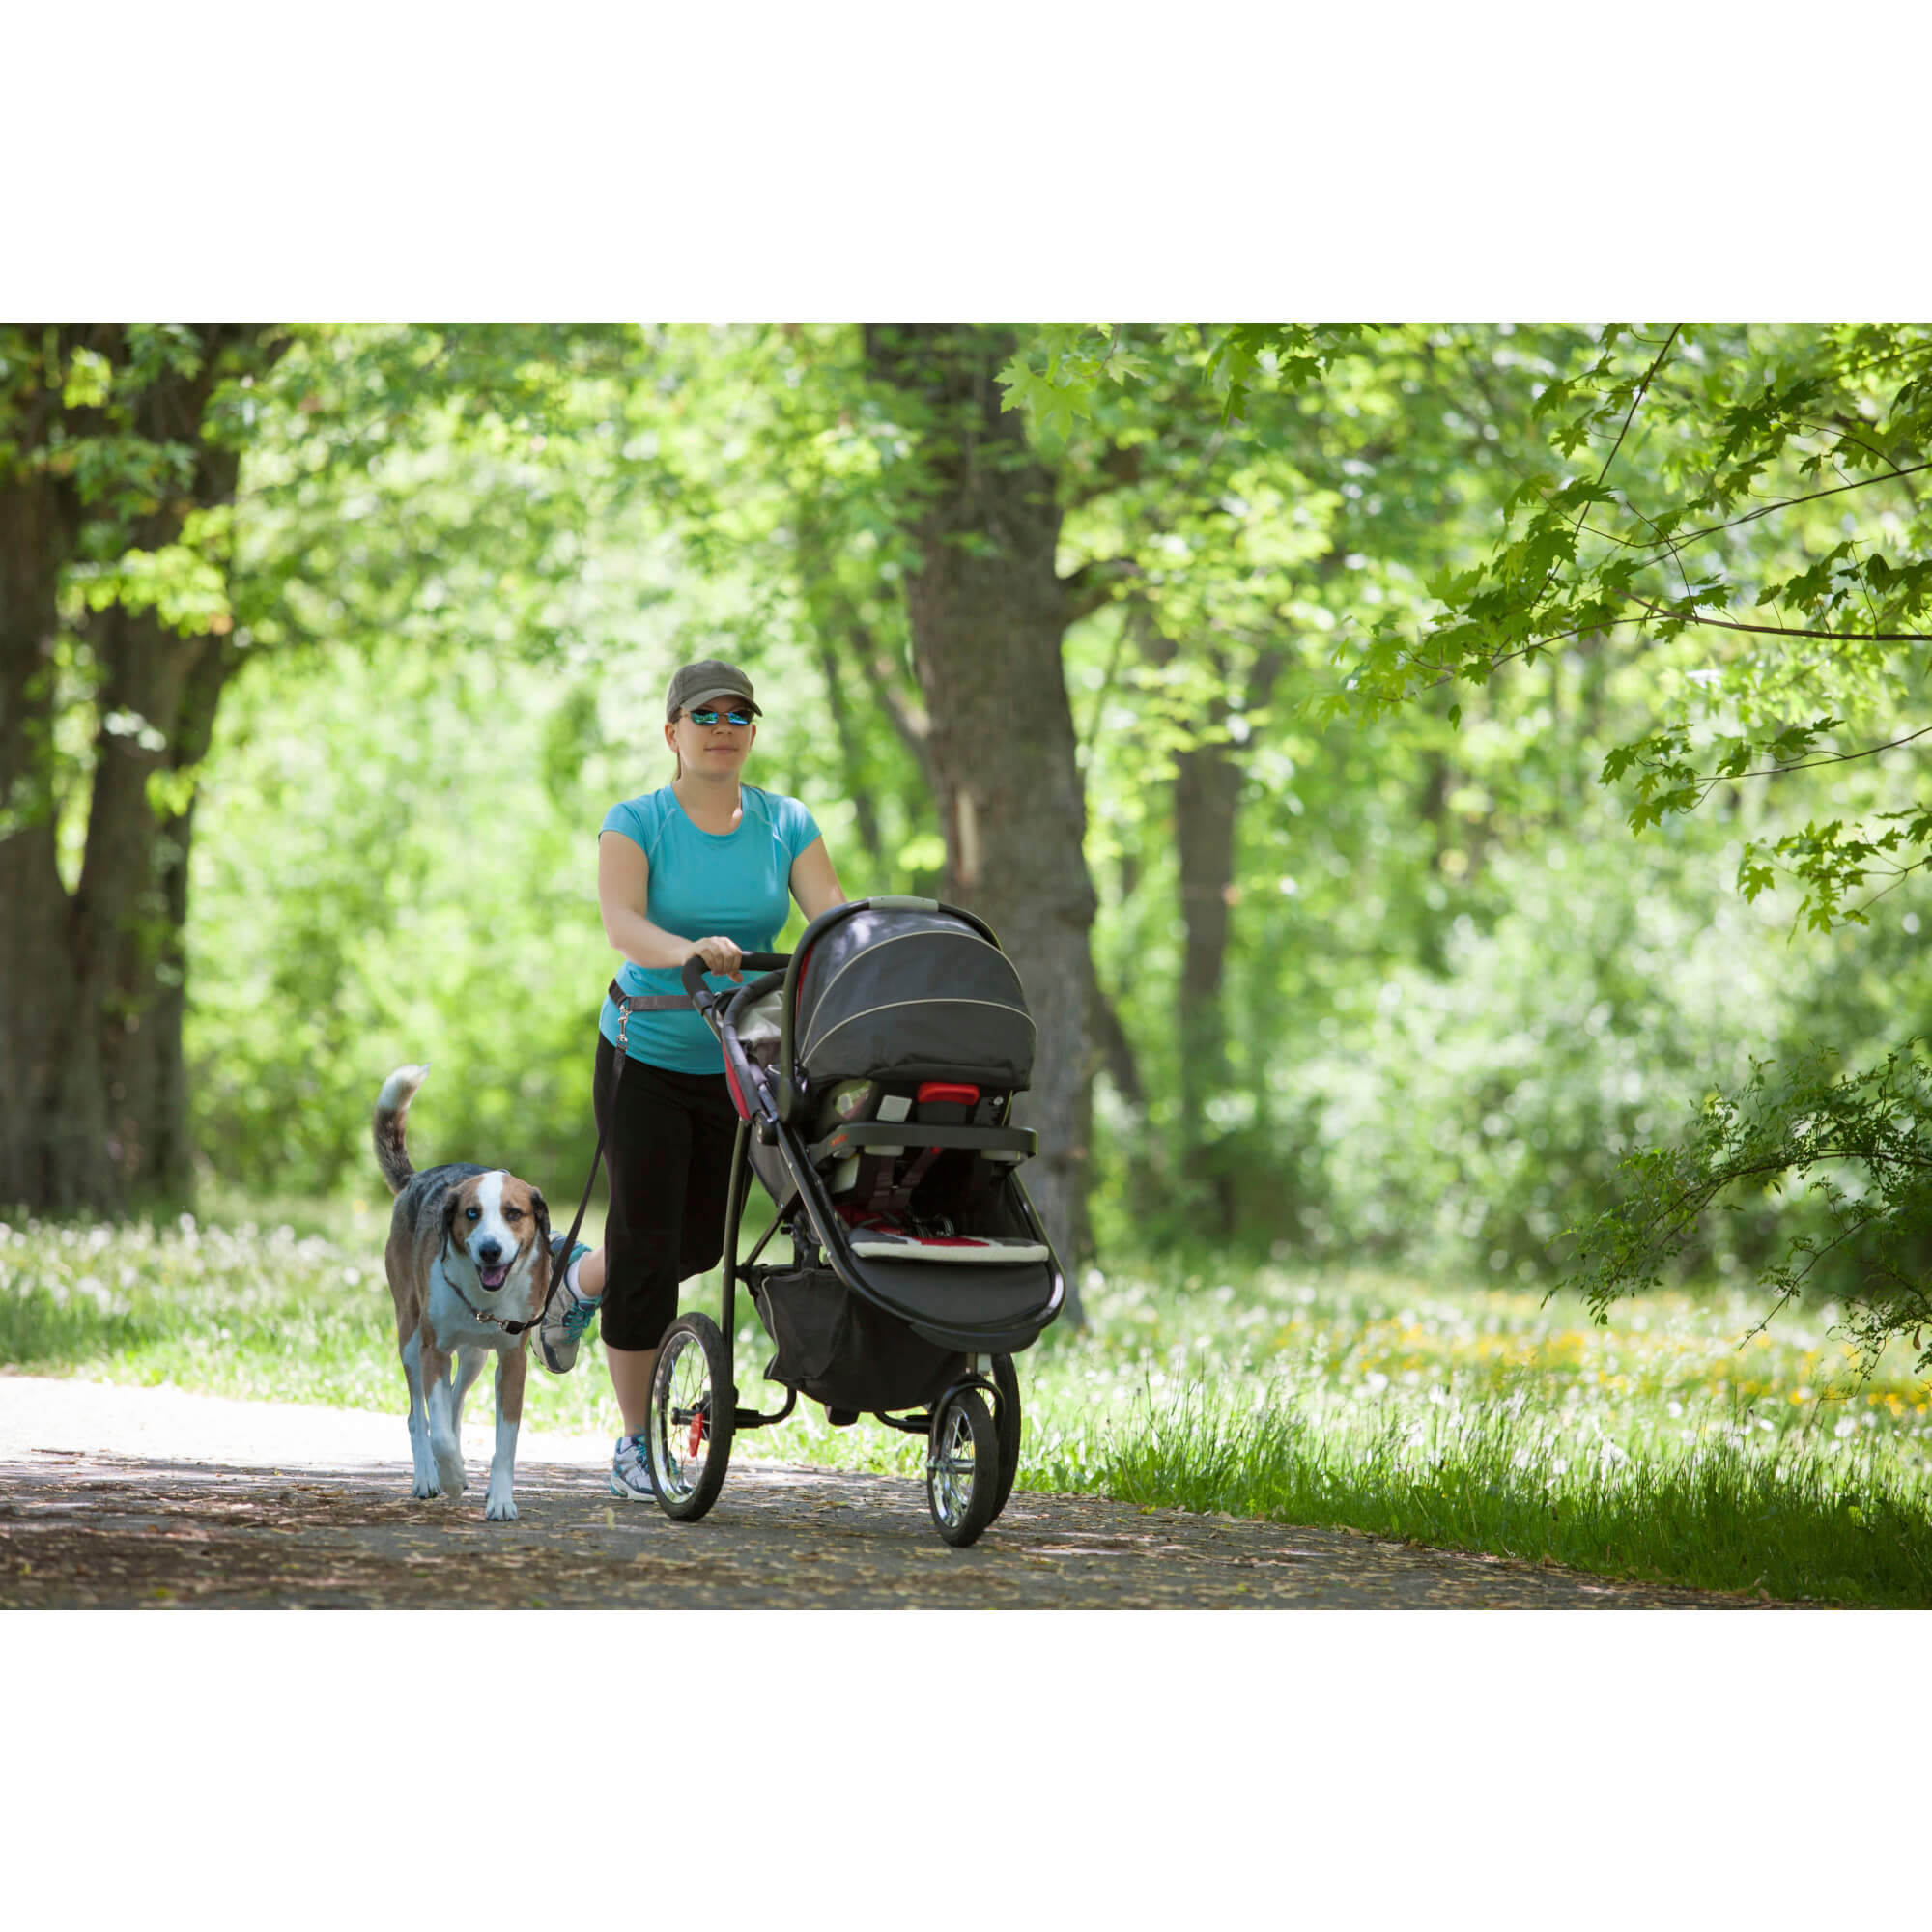 Lady jogging with dog and stroller using petsafe hands free leash